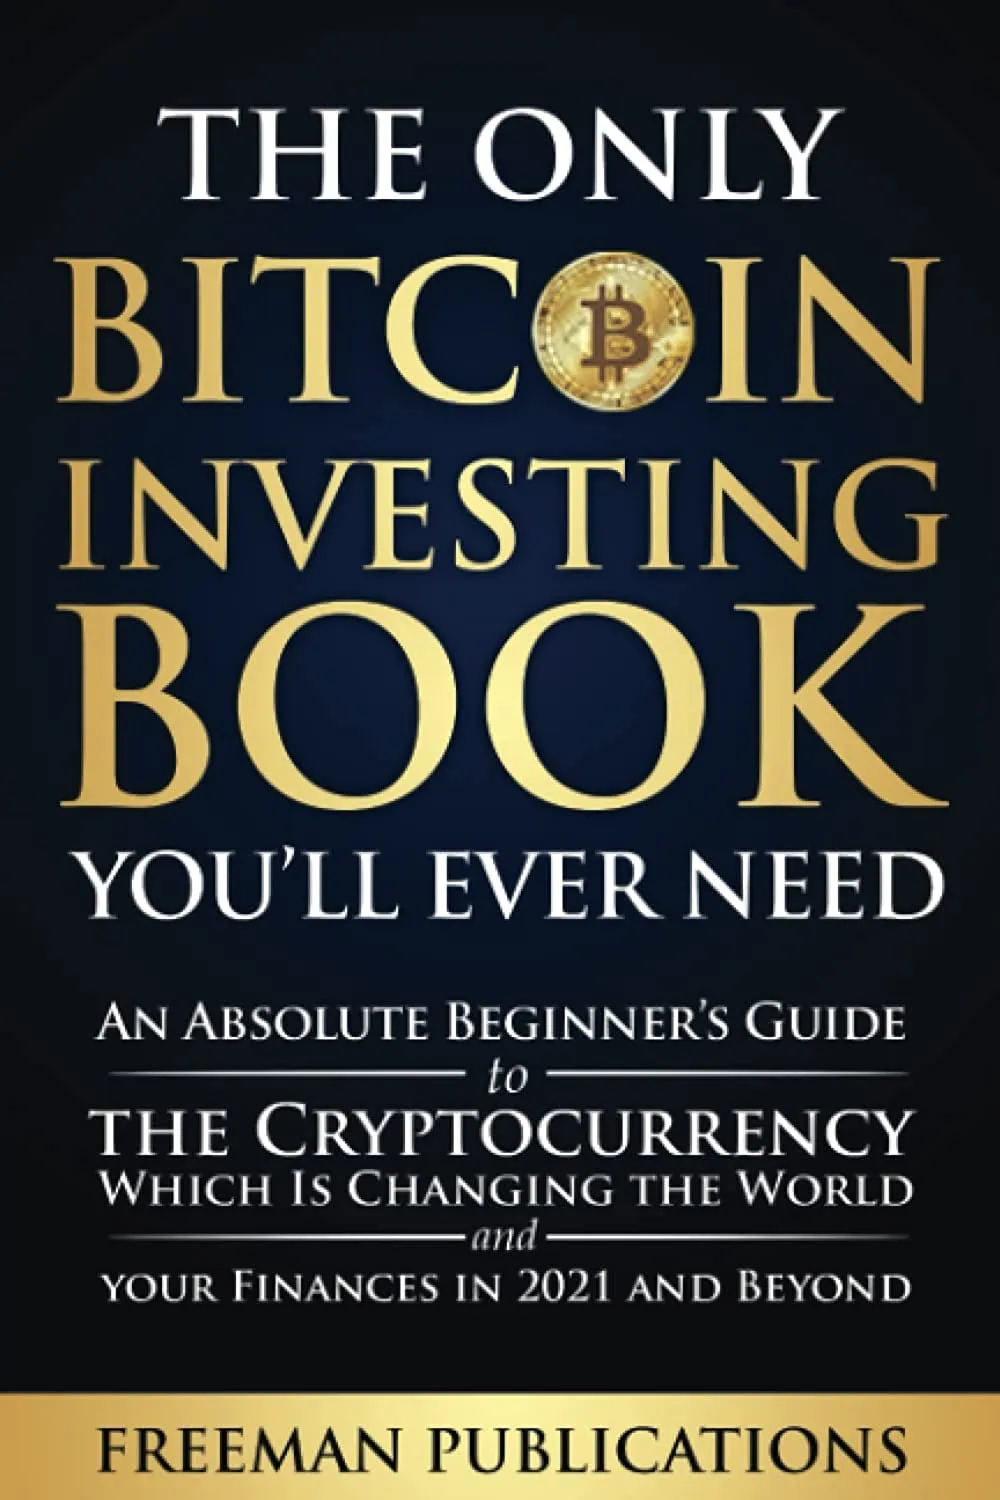 The Only Bitcoin Investing Book You’ll Ever Need